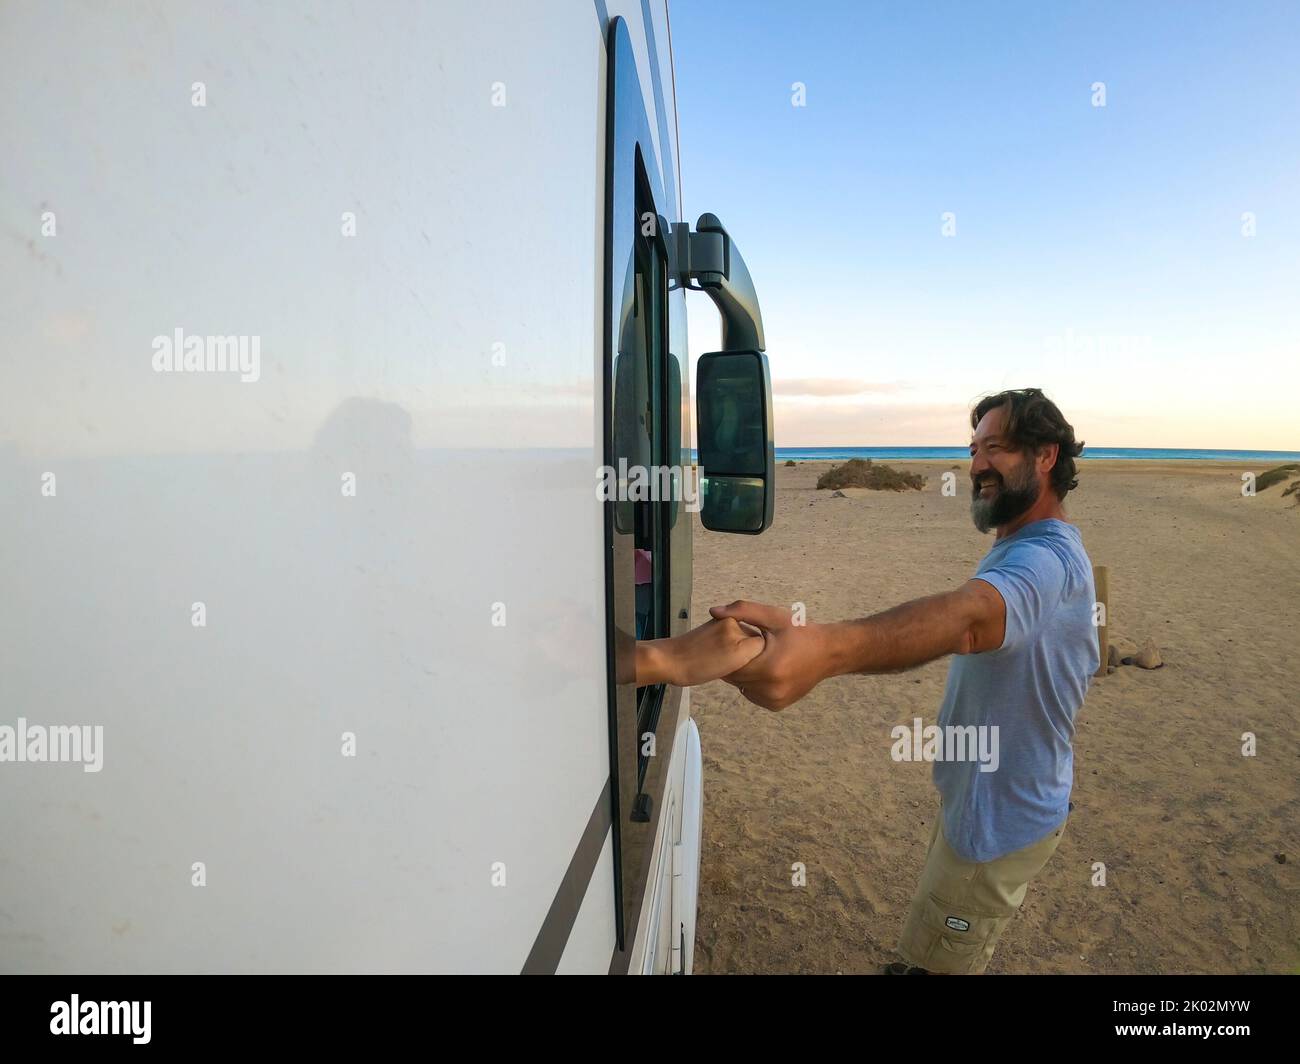 Outside view of couple holding hands. Woman inside a camper van and man outside smiling. Travel for holiday vacation lifestyle concept. beach and ocean in background Stock Photo